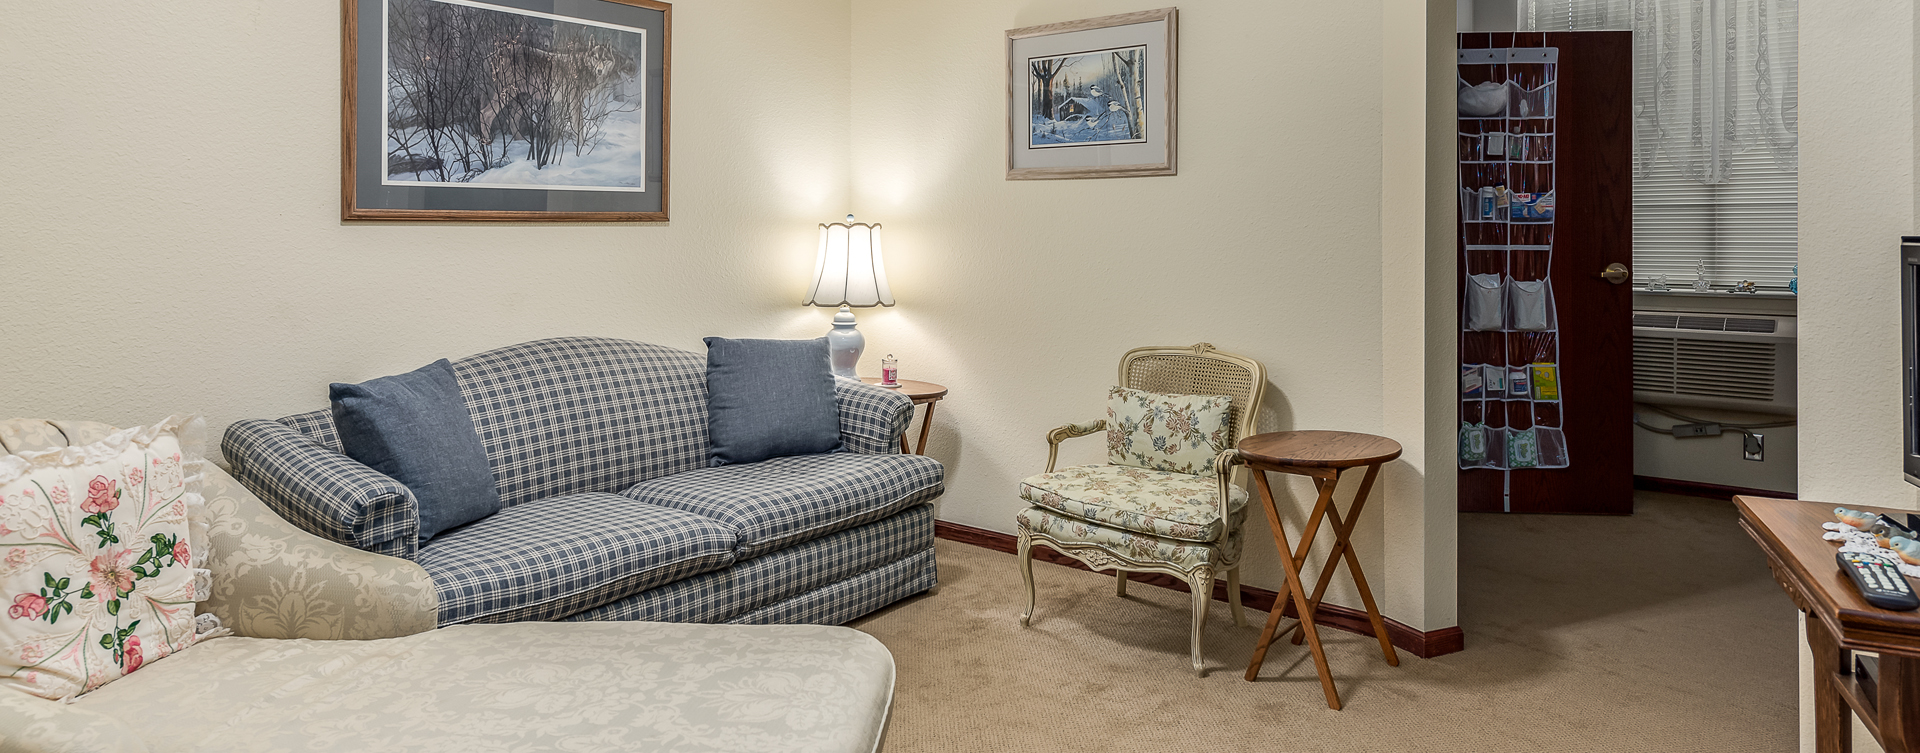 Personalize and decorate to your unique tastes an apartment at Bickford of Saginaw Township